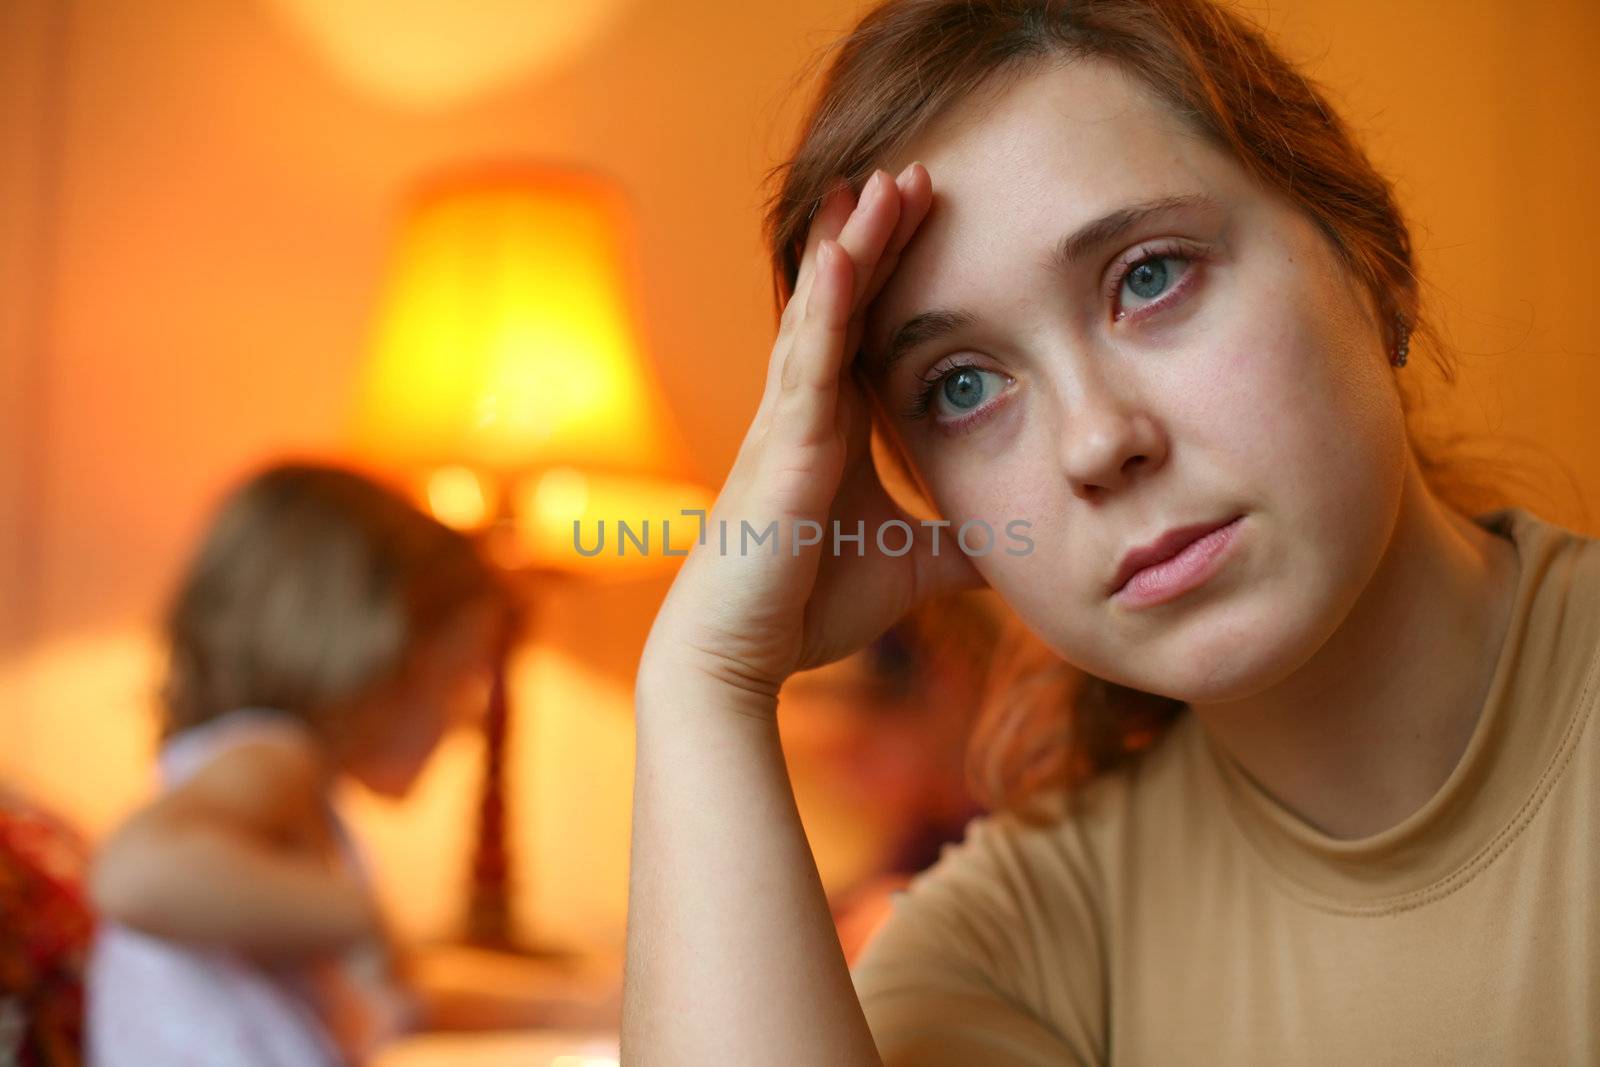 An image of a tired woman and a child